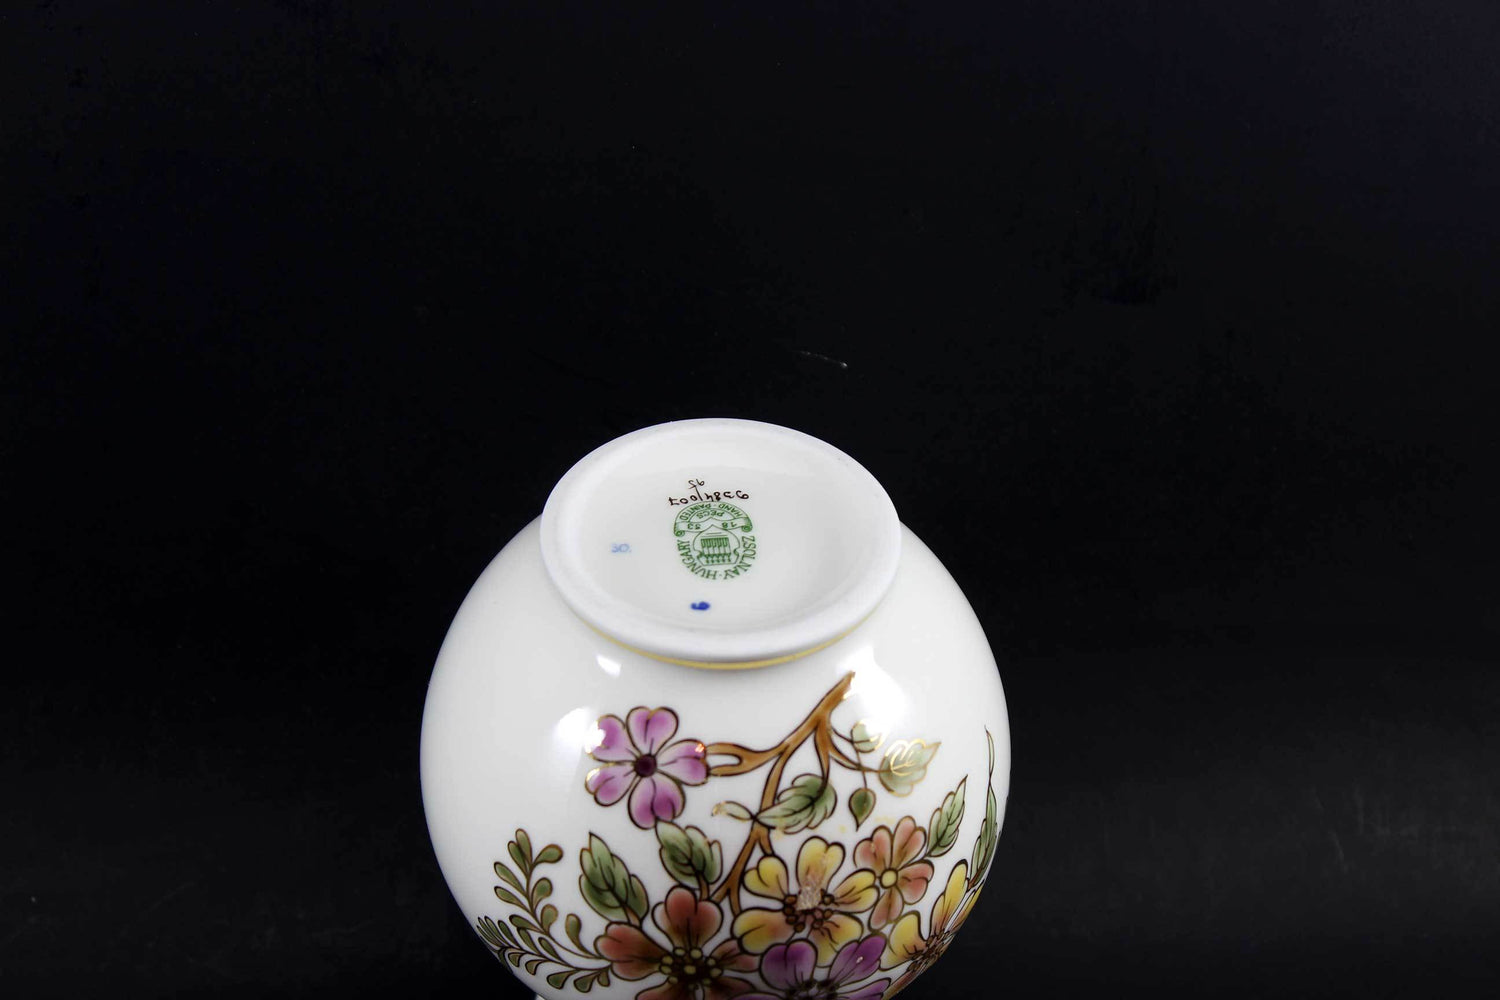 Zsolnay Porcelain, Hand Painted Vases and Trinket Box